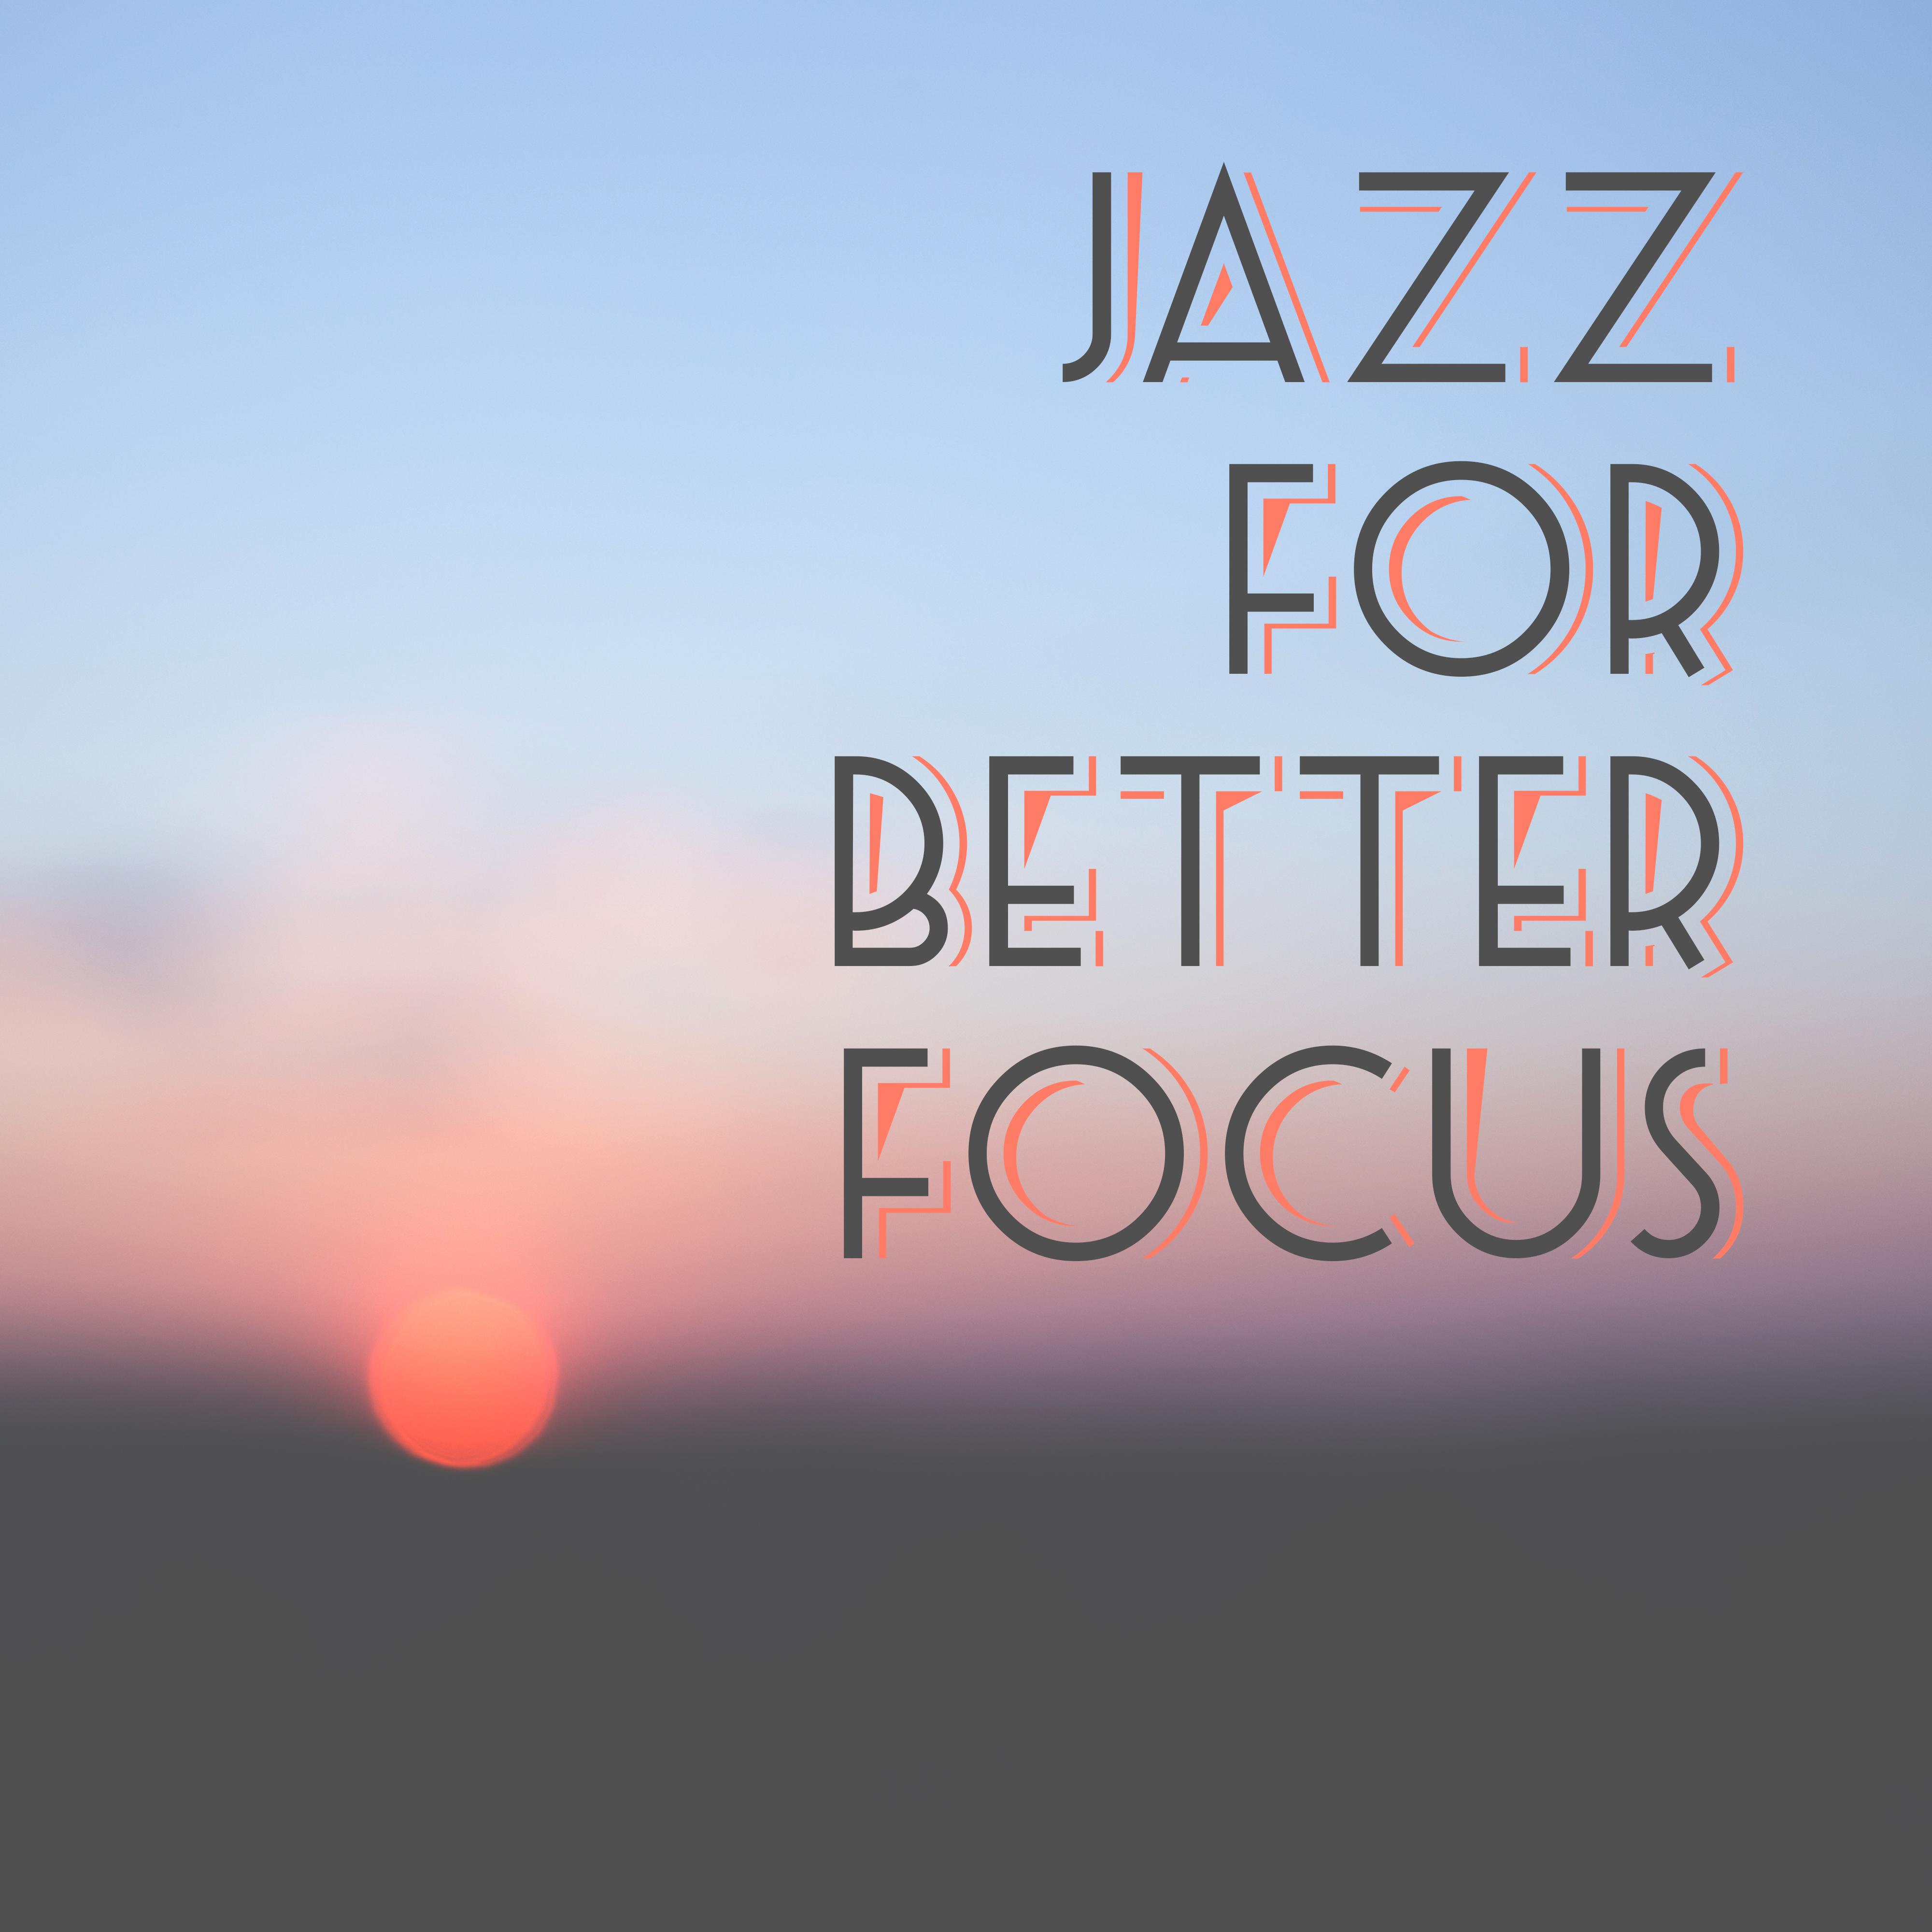 Jazz for Better Focus  Soft  Slow Jazz to Concentrate, Focus on Task, Piano Jazz, Peaceful Mind